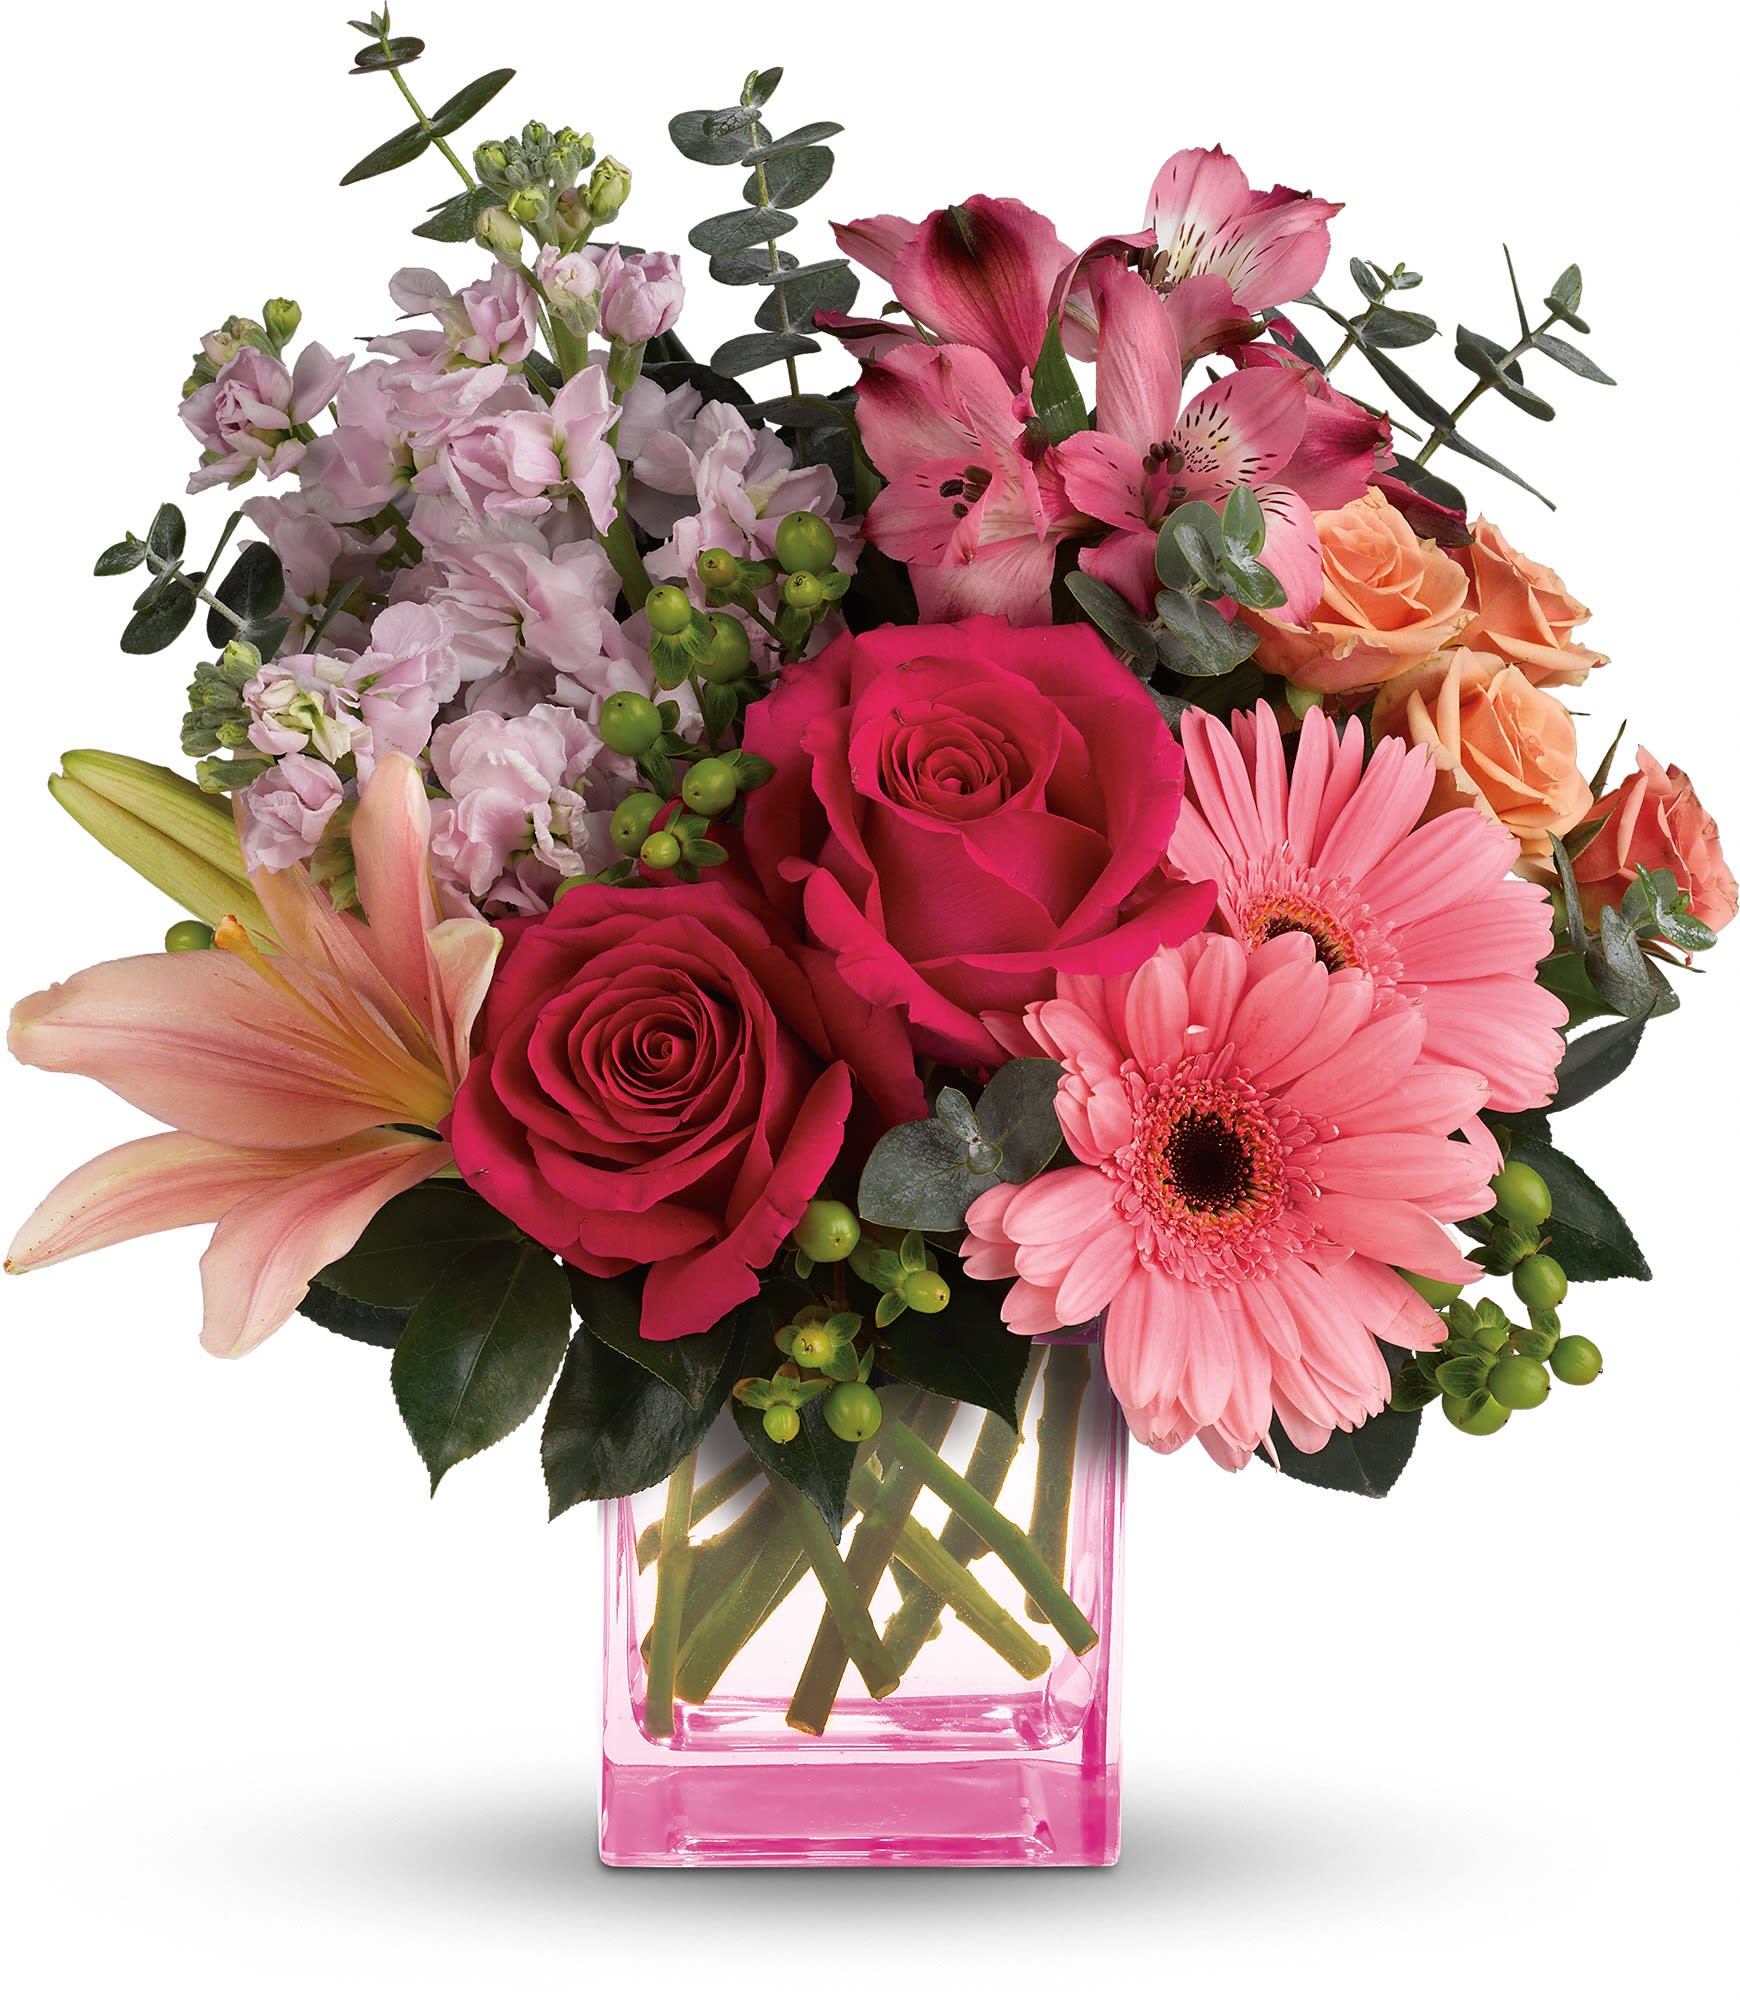 Painterly Pink Bouquet - Pretty as a painter's palette! Warm, wondrous shades of pink and peach play perfectly in this feminine bouquet that's artfully arranged in a pretty pink cube vase. What a fun, fabulous way to celebrate any occasion! his colorful arrangement includes hot pink roses, peach spray roses, pink asiatic lilies, pink gerberas, dark pink alstroemeria, pink stock, green hypericum, spiral eucalyptus and camellia leaves. Delivered in a pink cube vase. Approximately 13&quot; W x 13 1/2&quot; H